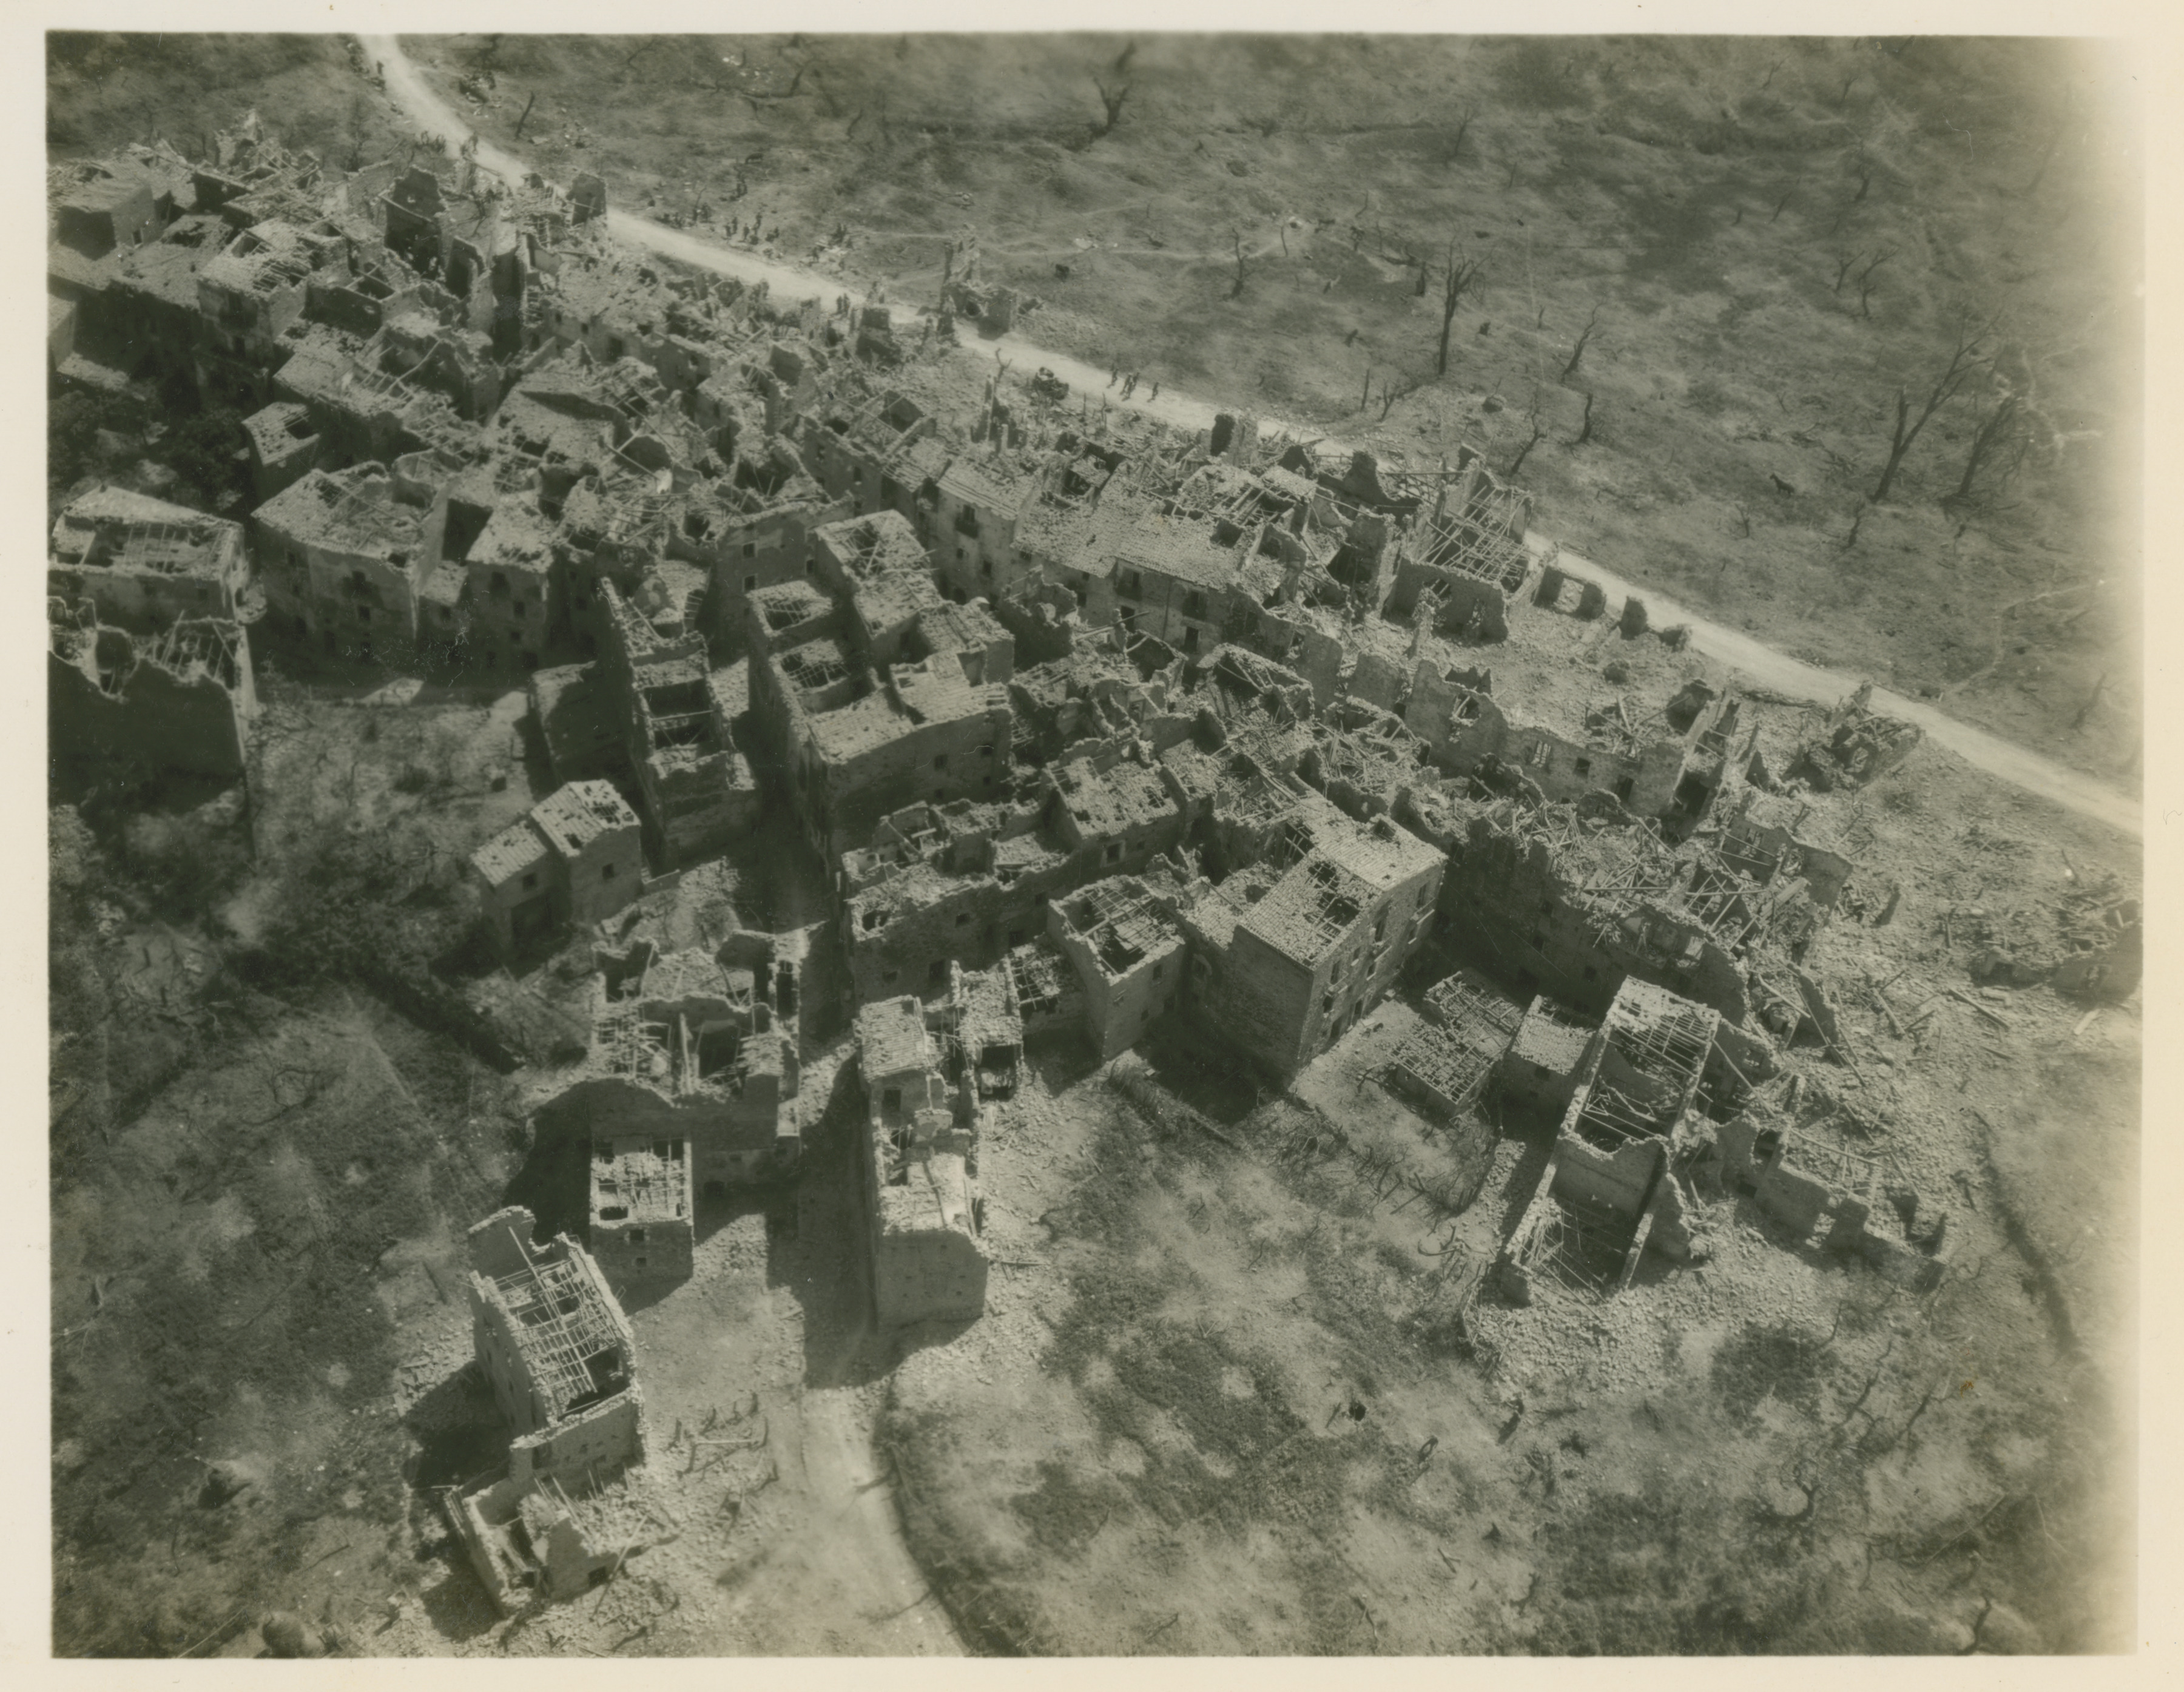 Aerial View Of War Damage To Santa Maria Infante Italy In